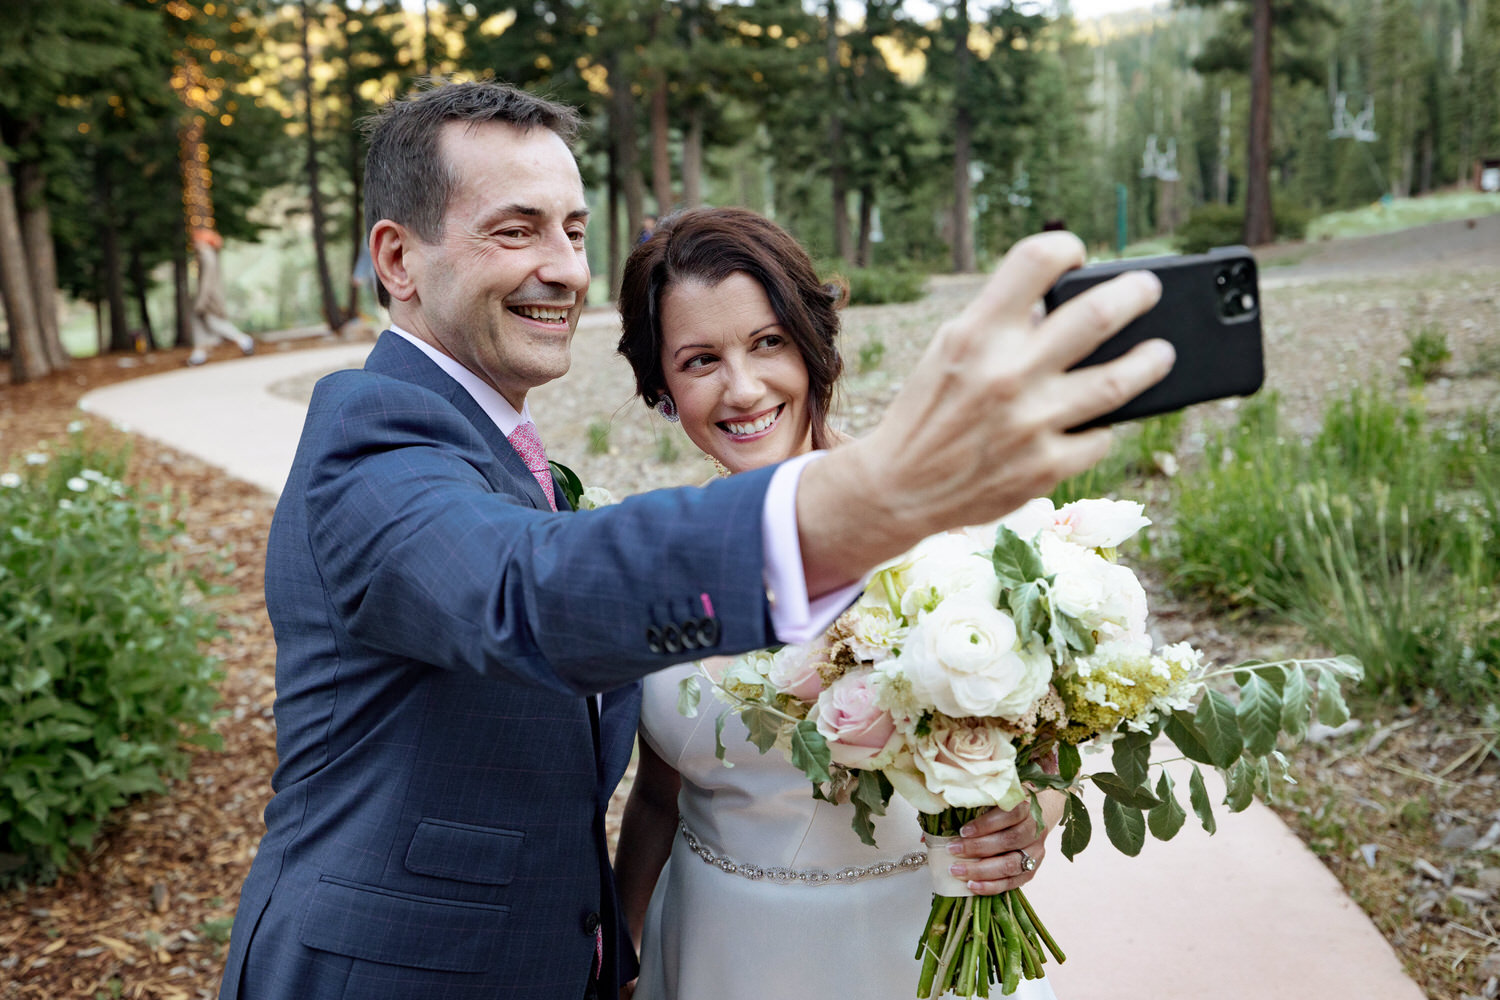 Wedding day selfie for the bride and groom.